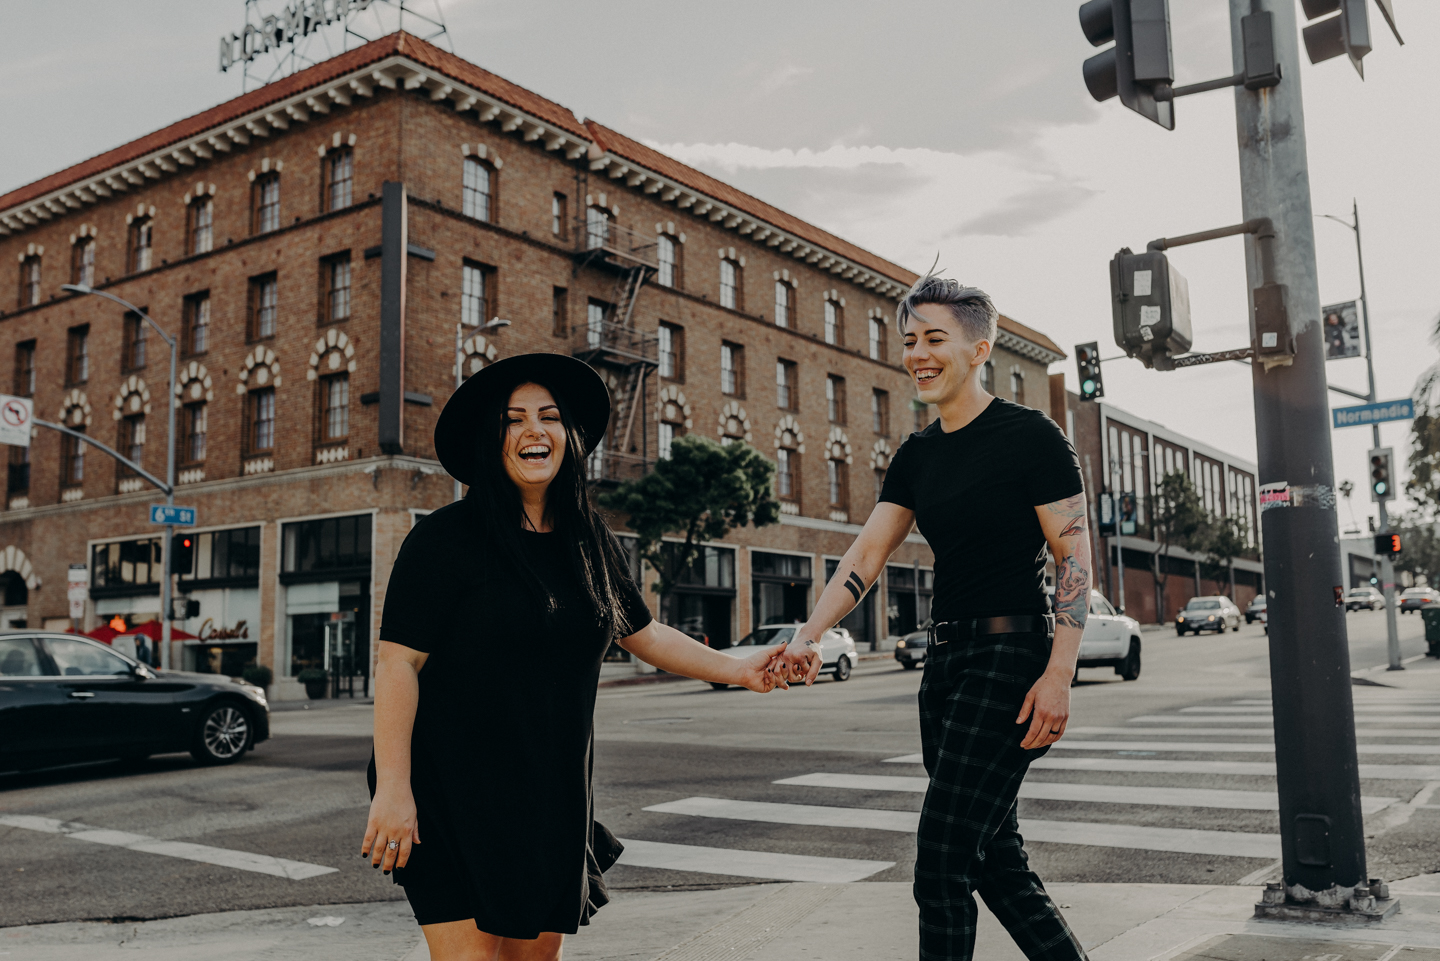 queer wedding photographer in los angeles - lesbian engagement session los angeles - isaiahandtaylor.com-012.jpg